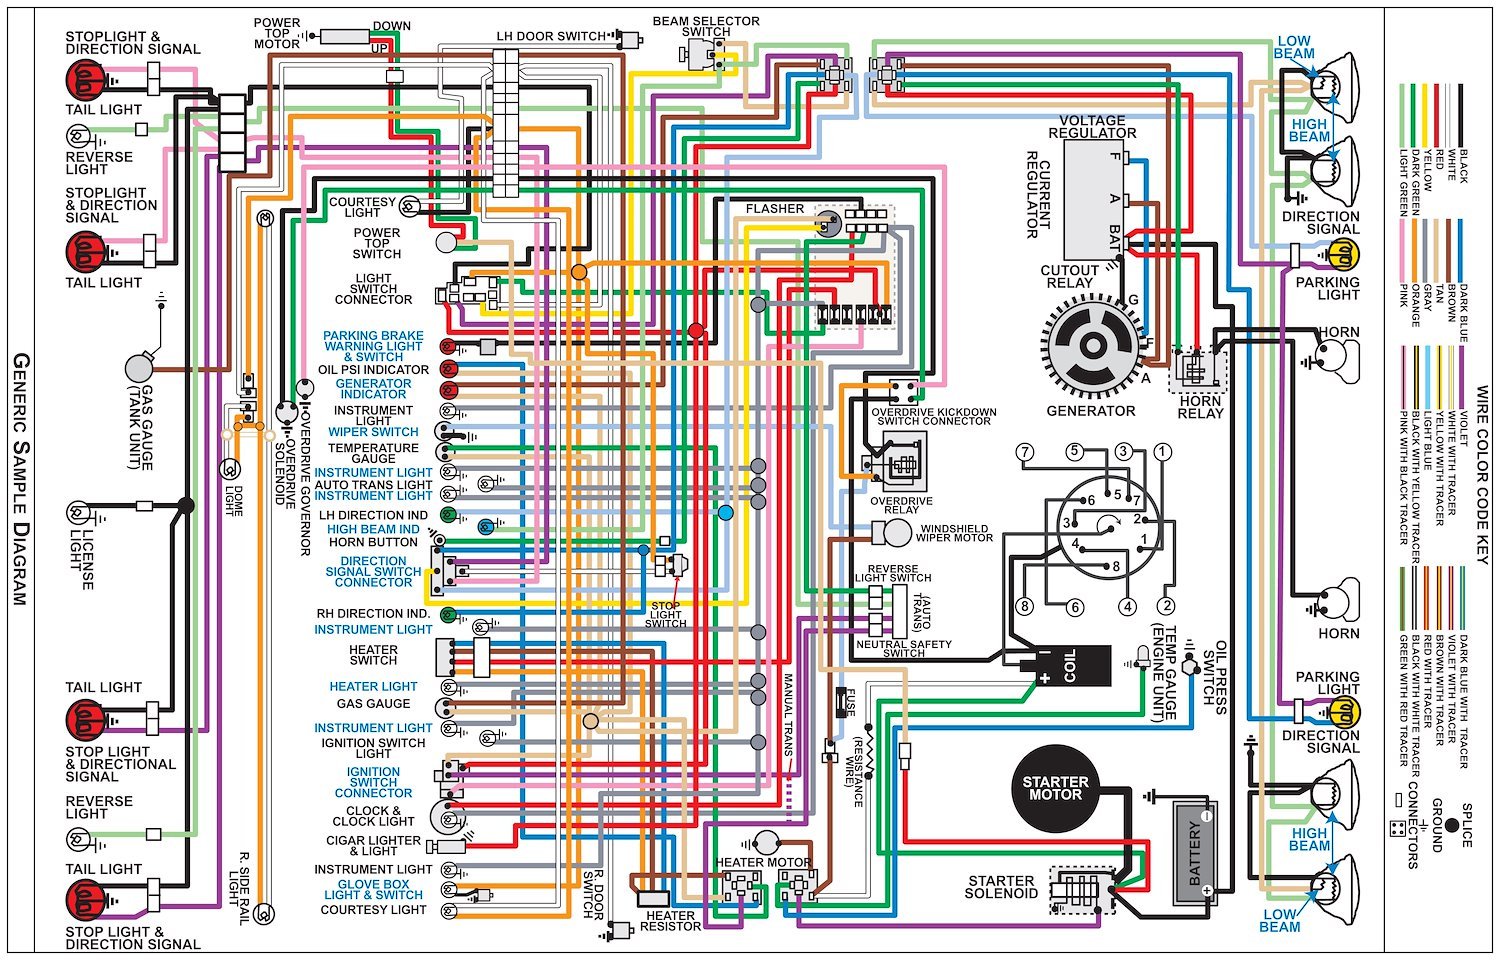 Wiring Diagram for 1972 Dodge Coronet, Charger with